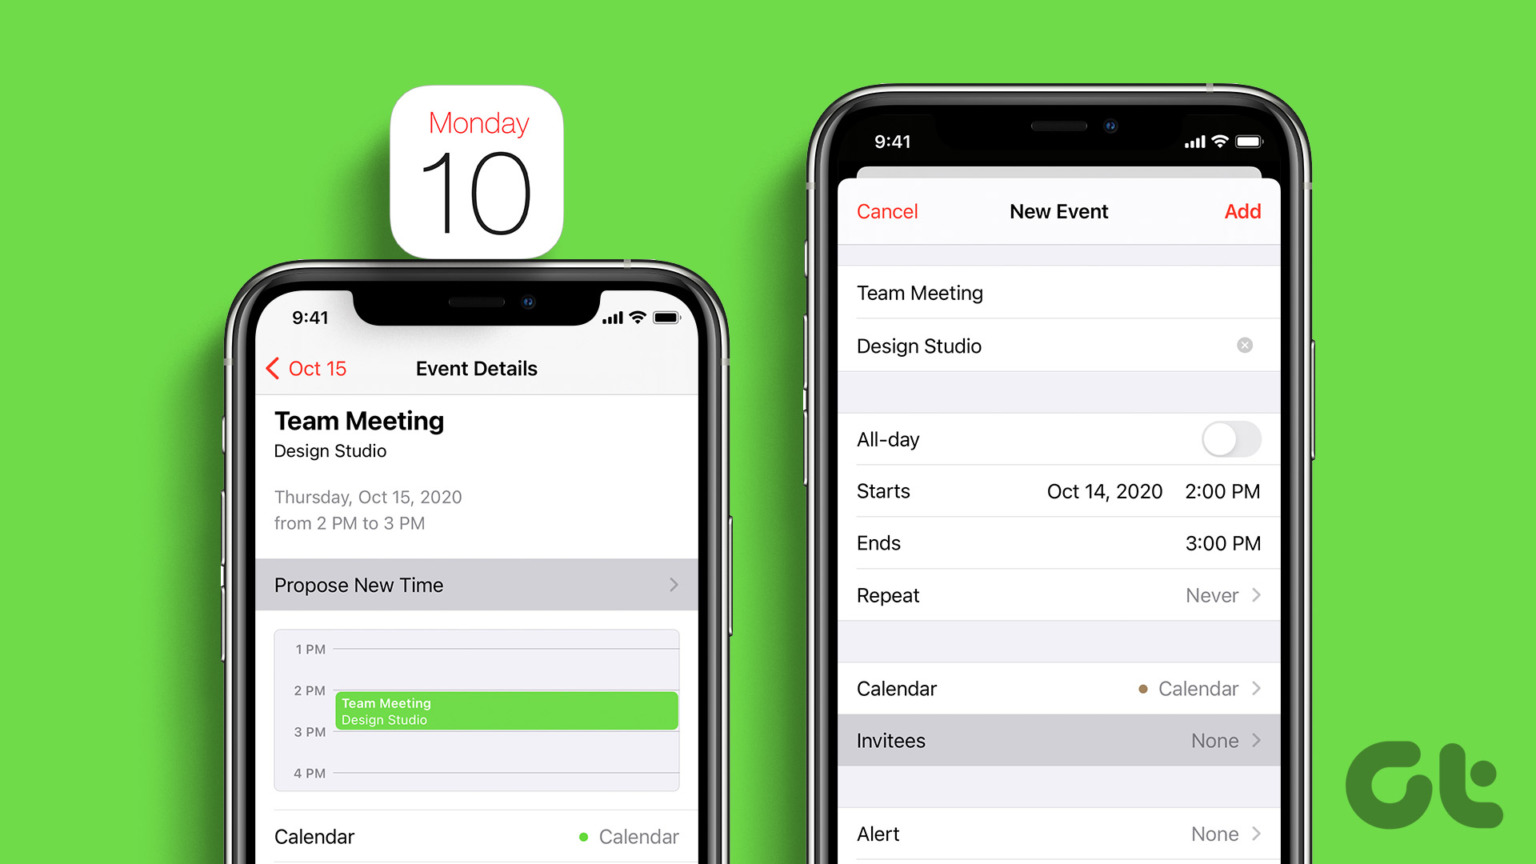 How to Send or Accept Invites With the Calendar App on iPhone Guiding